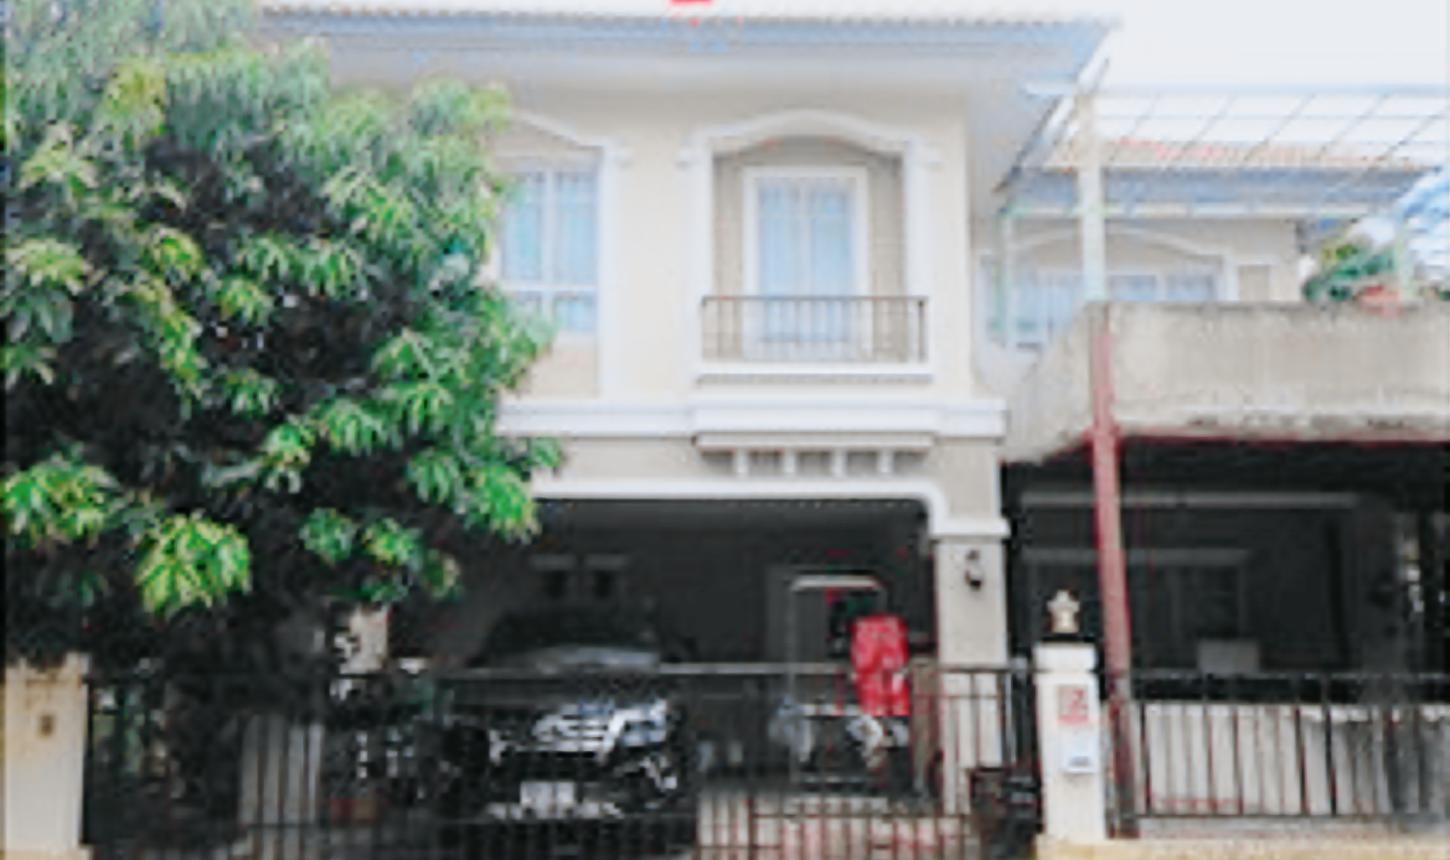 Single detached house for sale, Passorn Watcharaphon - Ring Road.